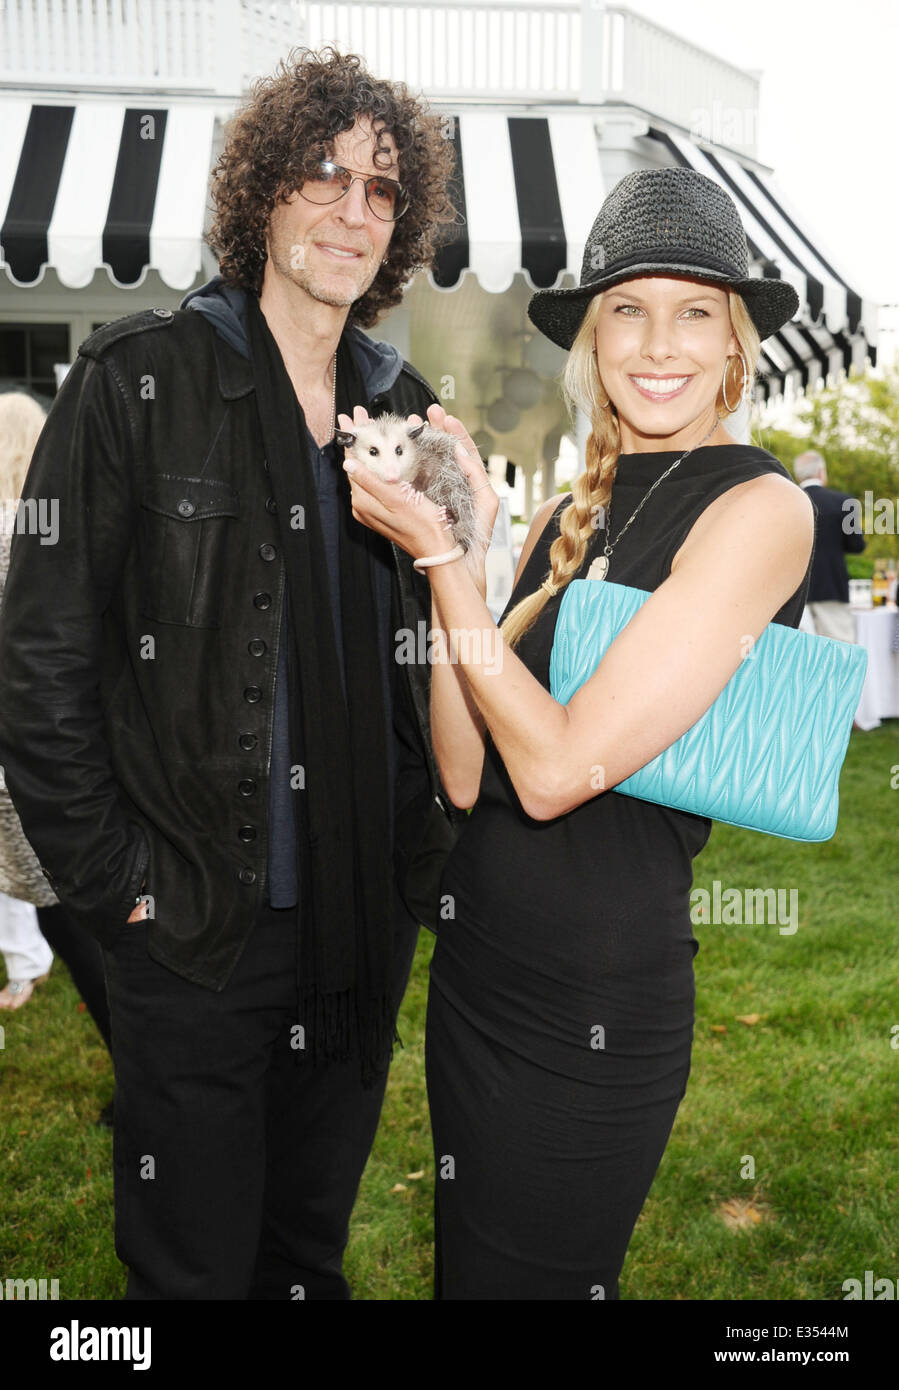 Get Wild Event benefiting Evelyn Alexander Wildlife in the Hamptons  Featuring: Beth Ostrosky Stern,Howard Stern Where: Southampton, NY, United States When: 22 Jun 2013 Stock Photo